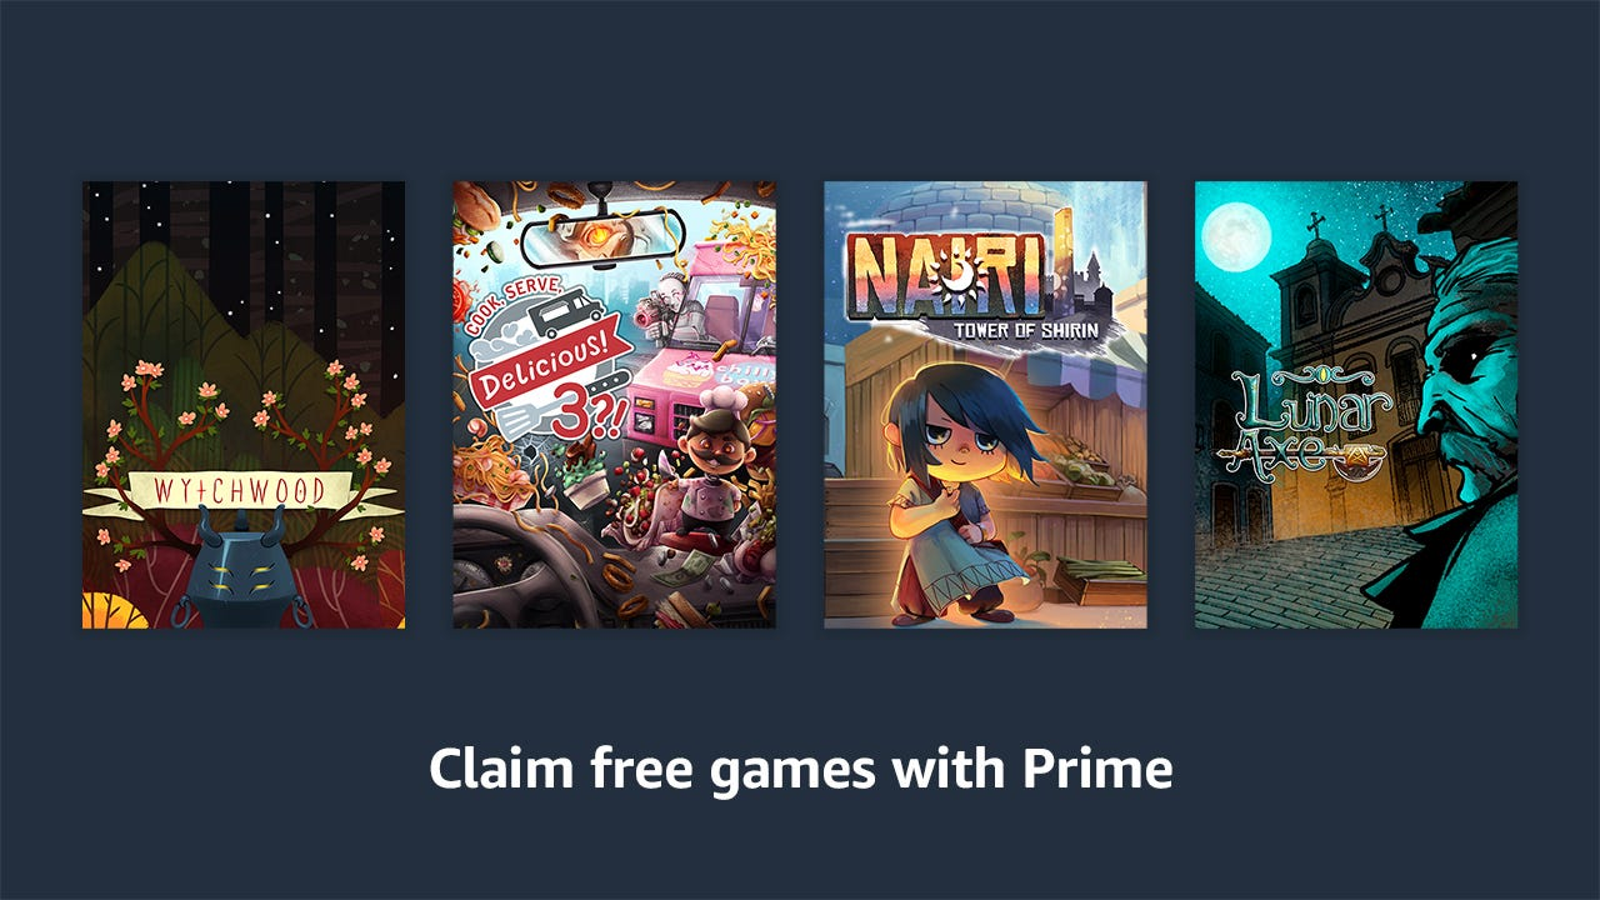 announces free Prime Gaming titles for July